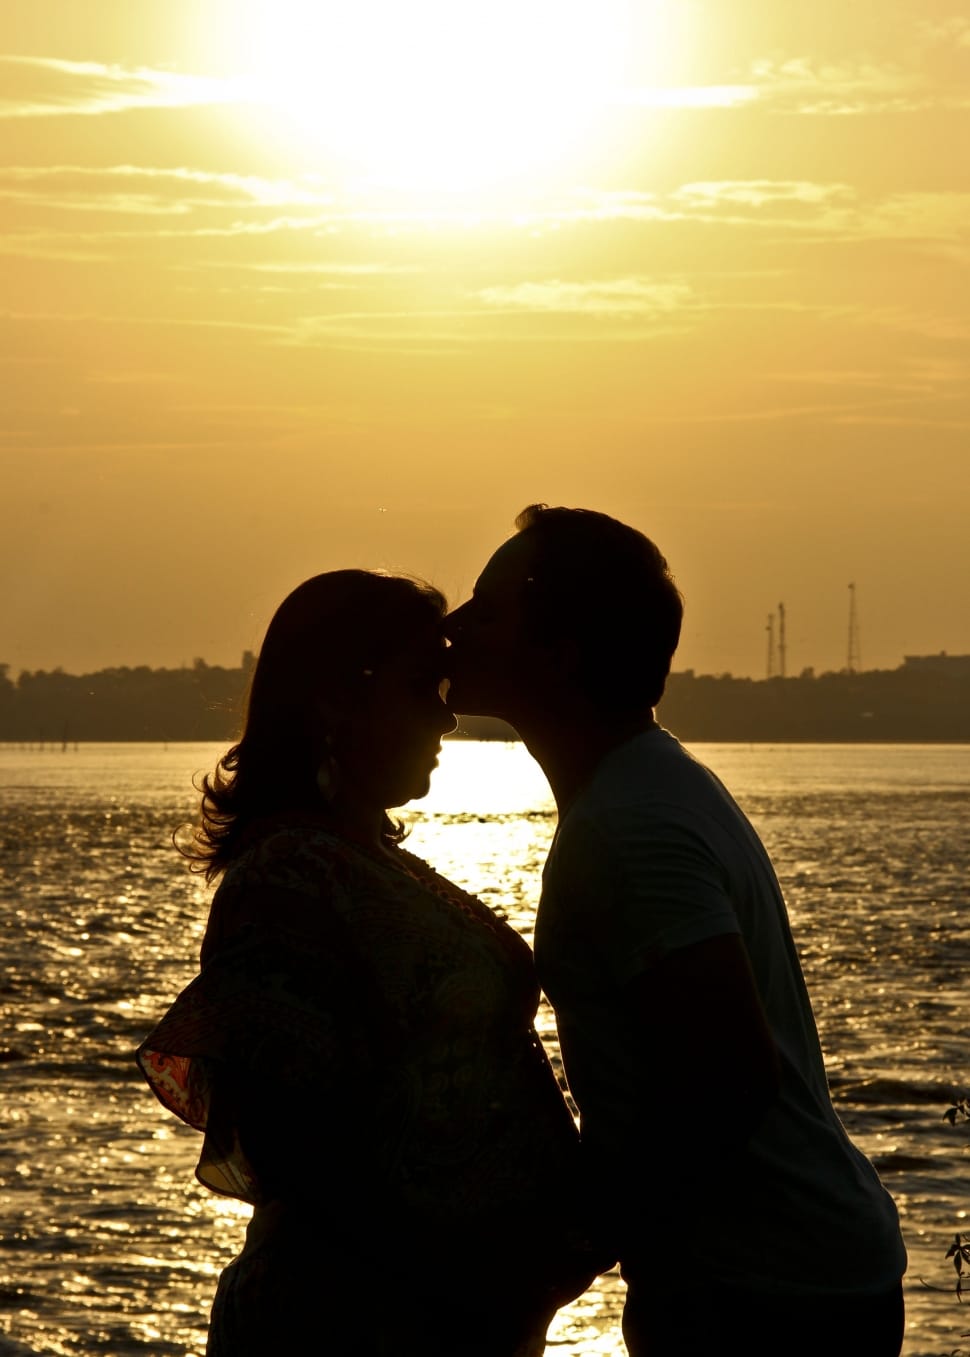 silhouette of man kissing woman near body of water during sunset preview